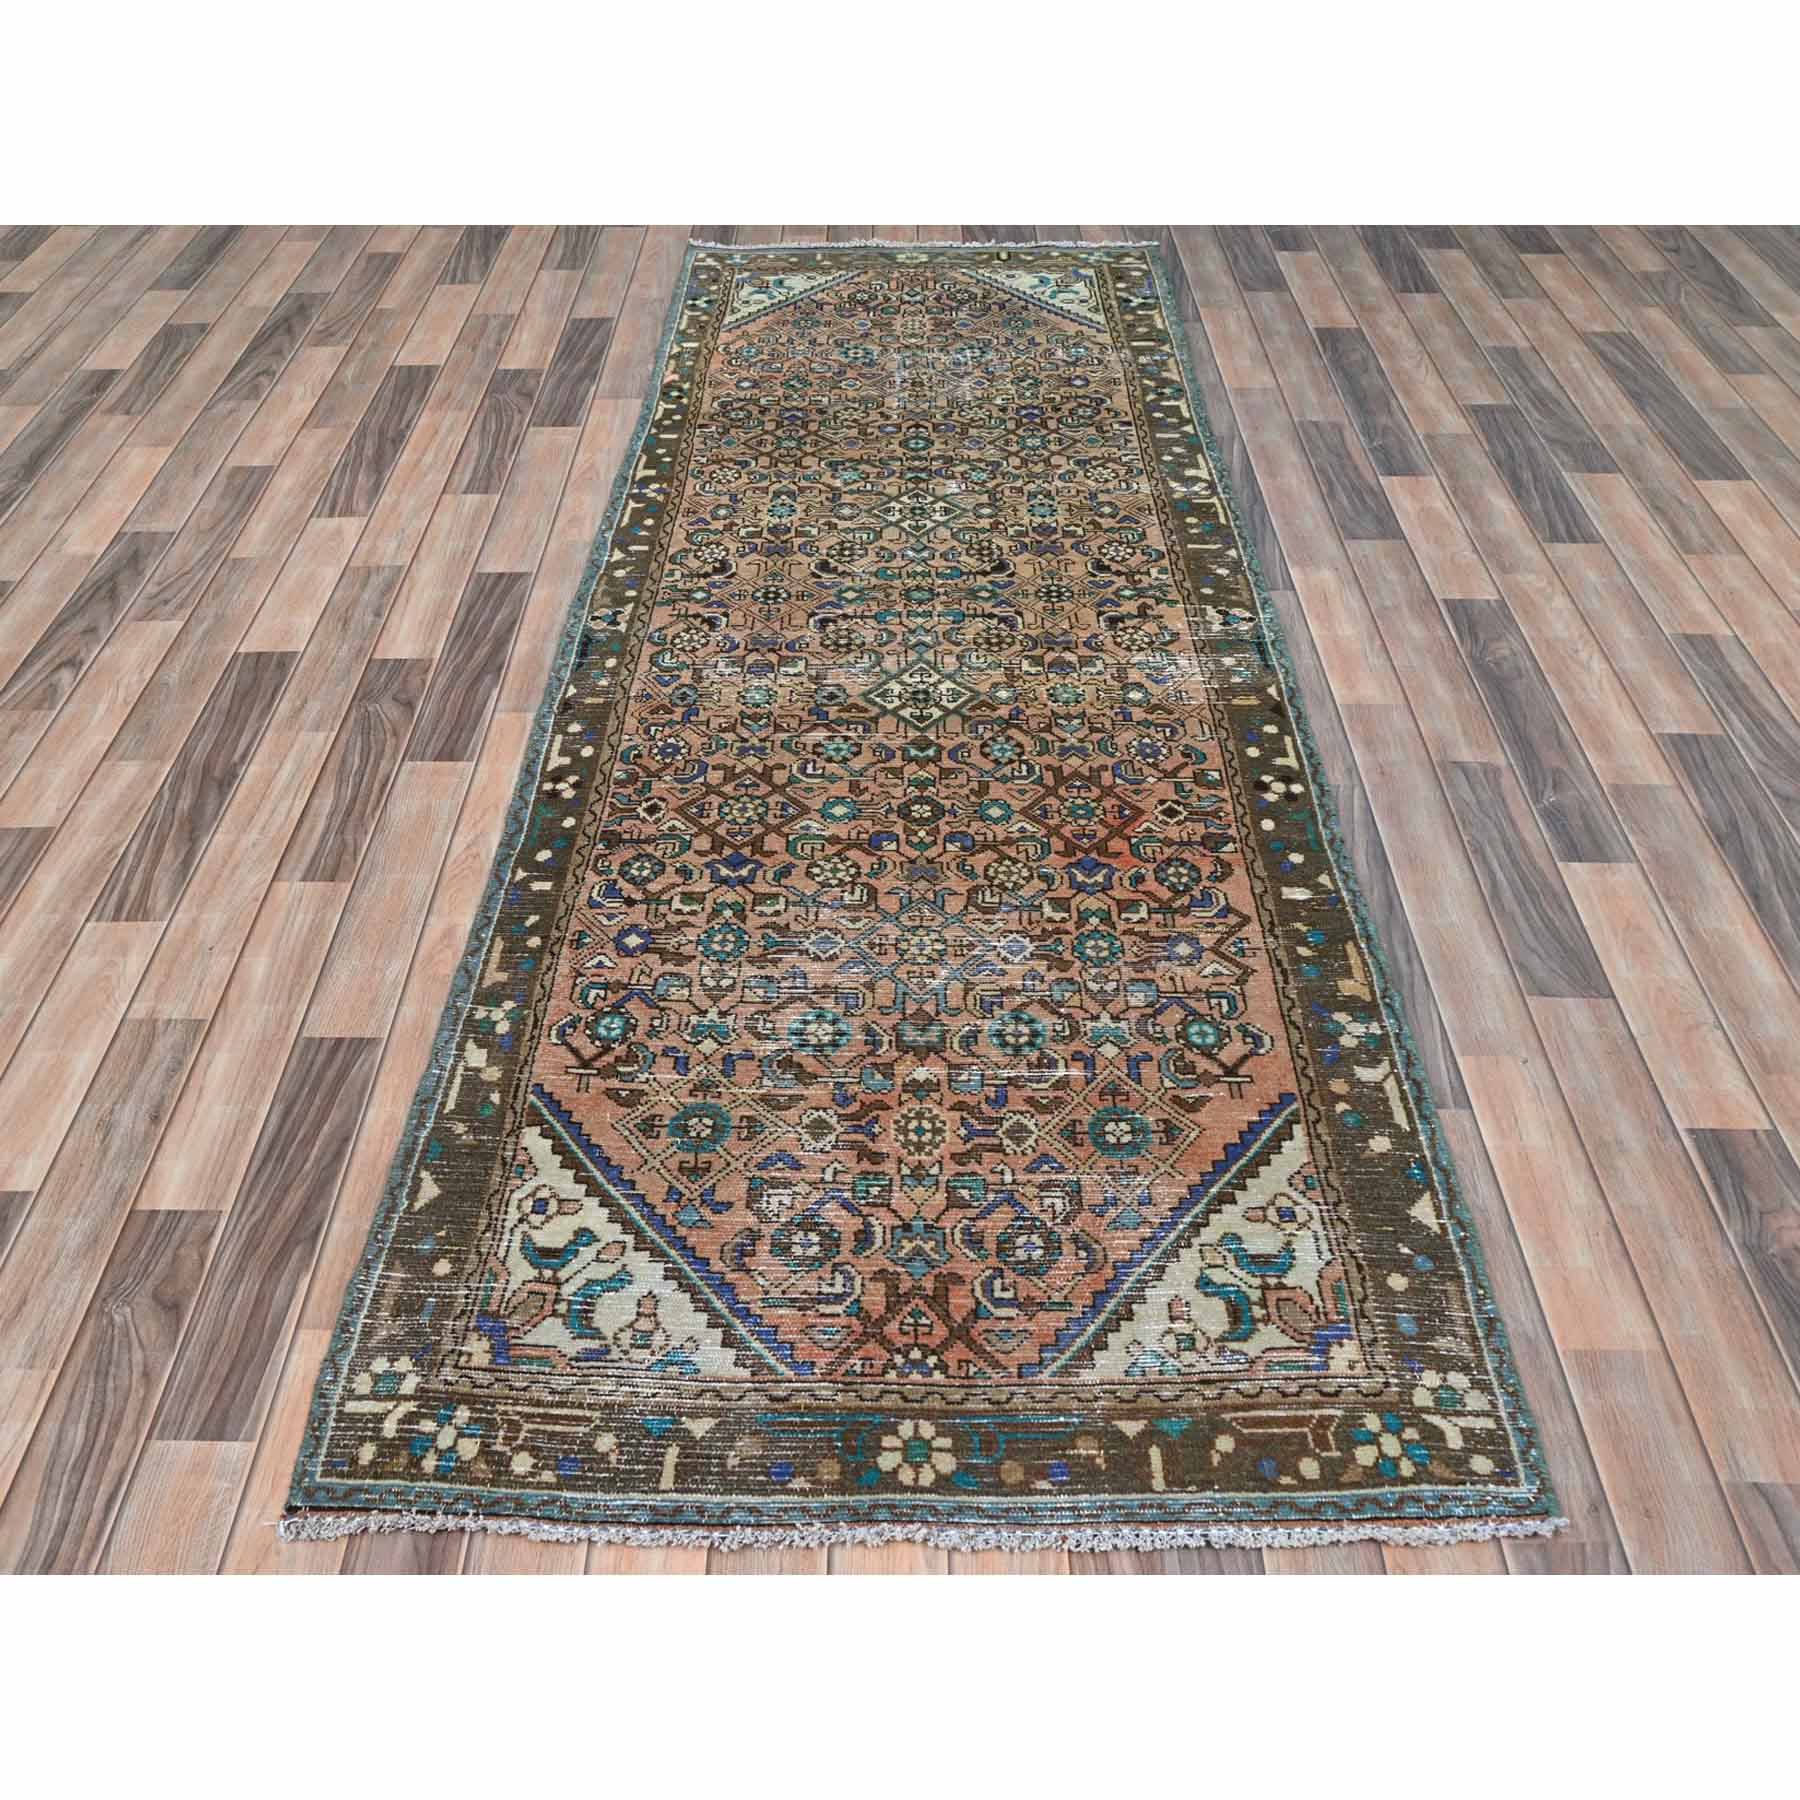 Overdyed-Vintage-Hand-Knotted-Rug-409395